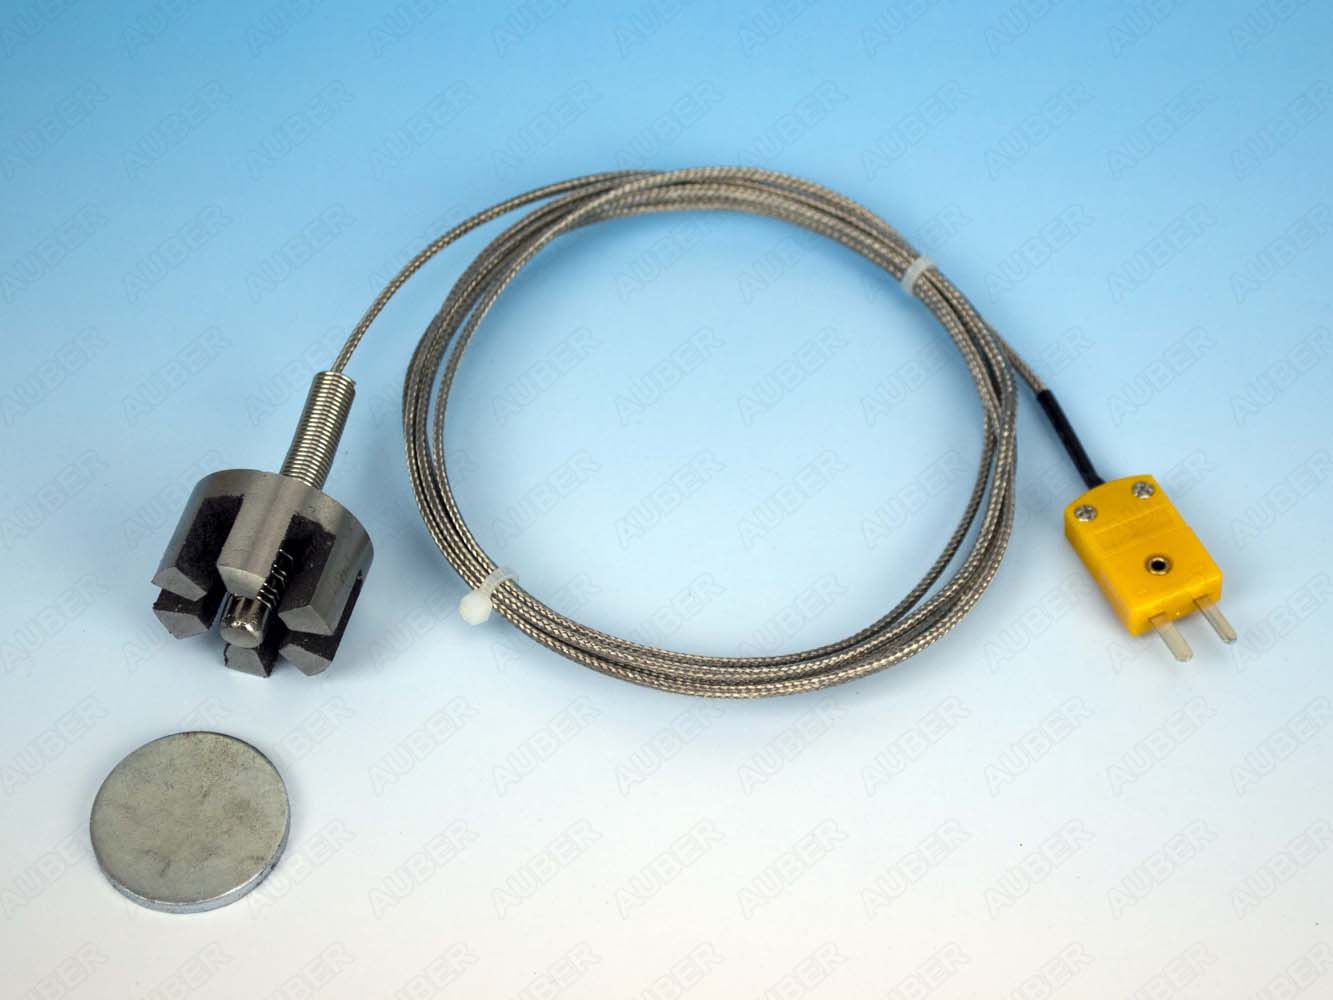 K Type Magnet Probe for Surfaces and Walls - Click Image to Close